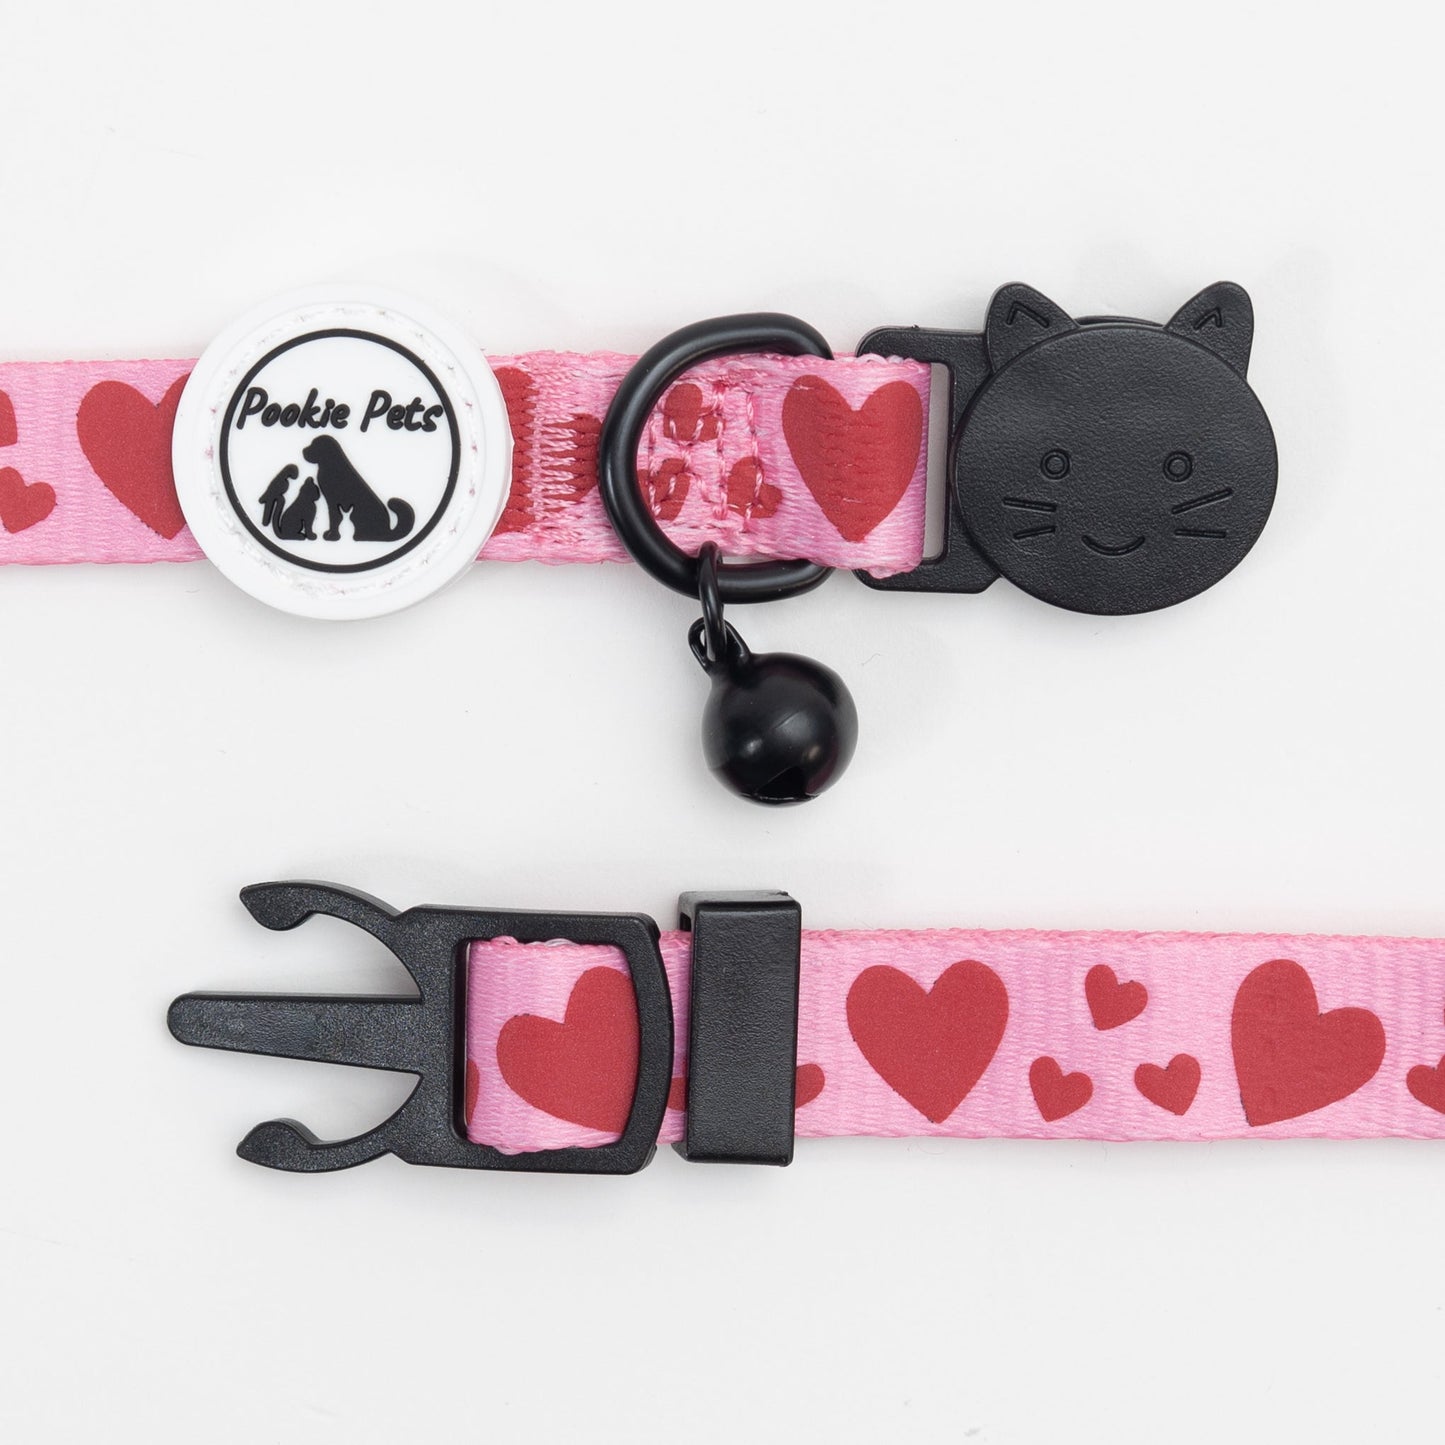 Best Cat Collar: Reflective Comfort Cat Collar with Heart Patterns by Pookie Pets